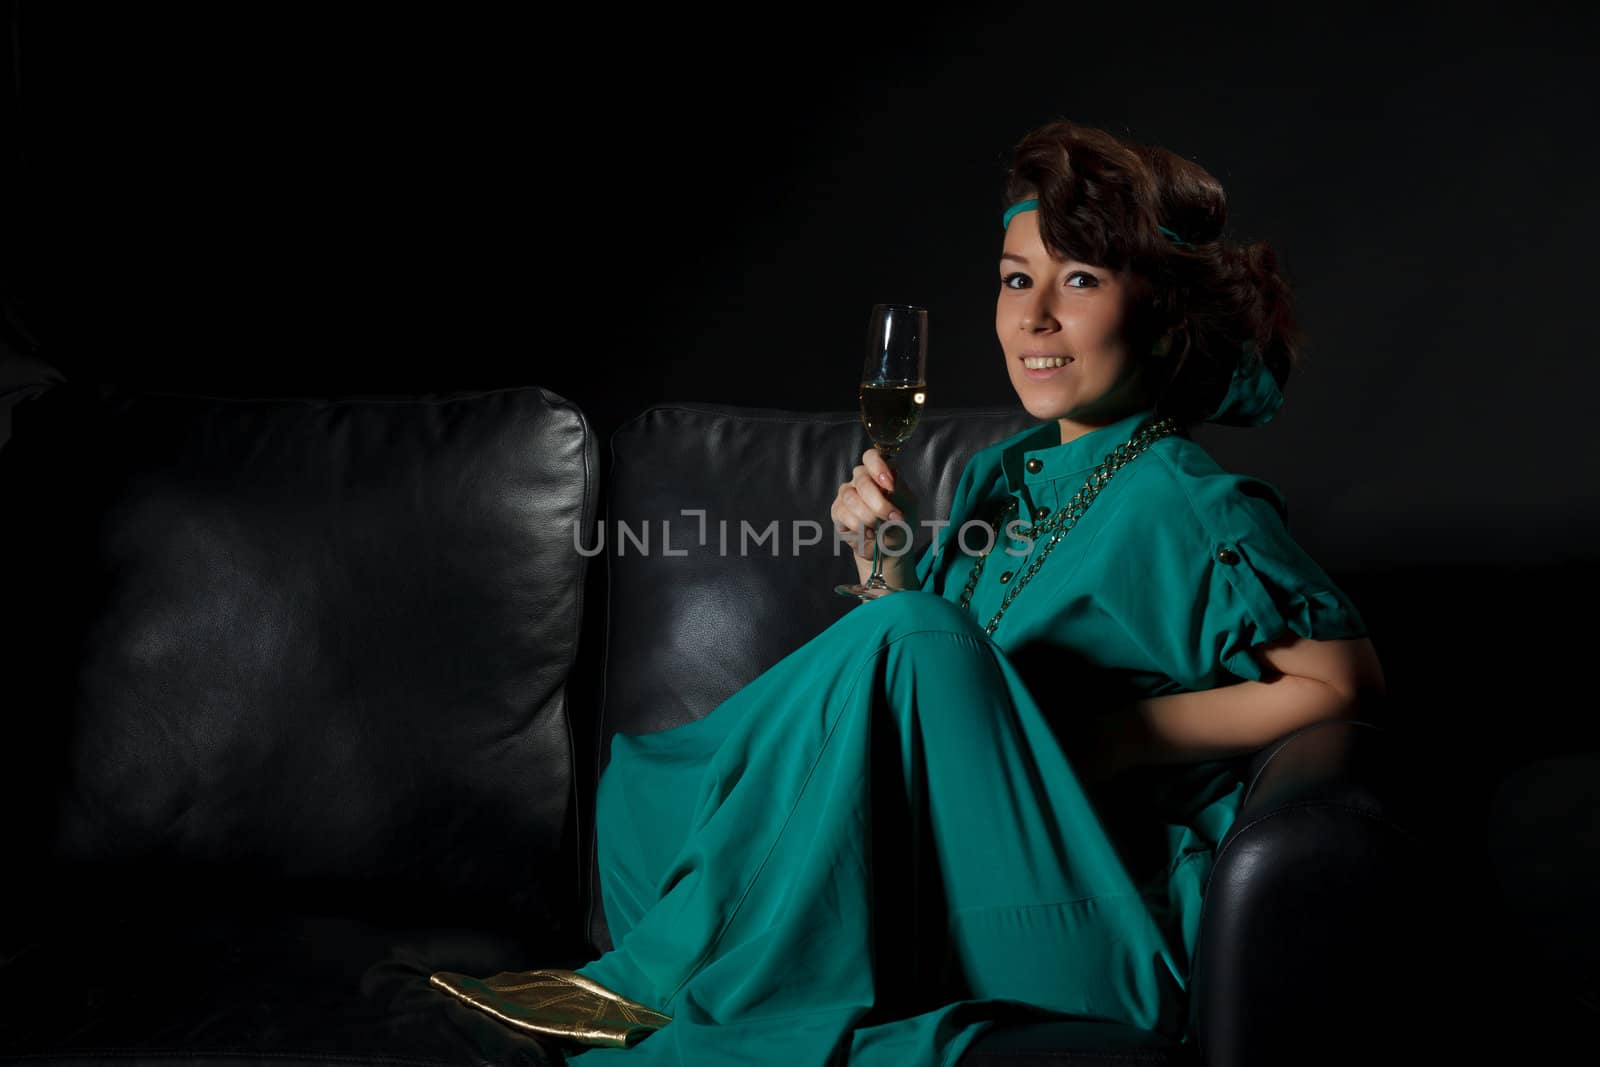 Beautiful girl sitting on a sofa with glass of wine, black background